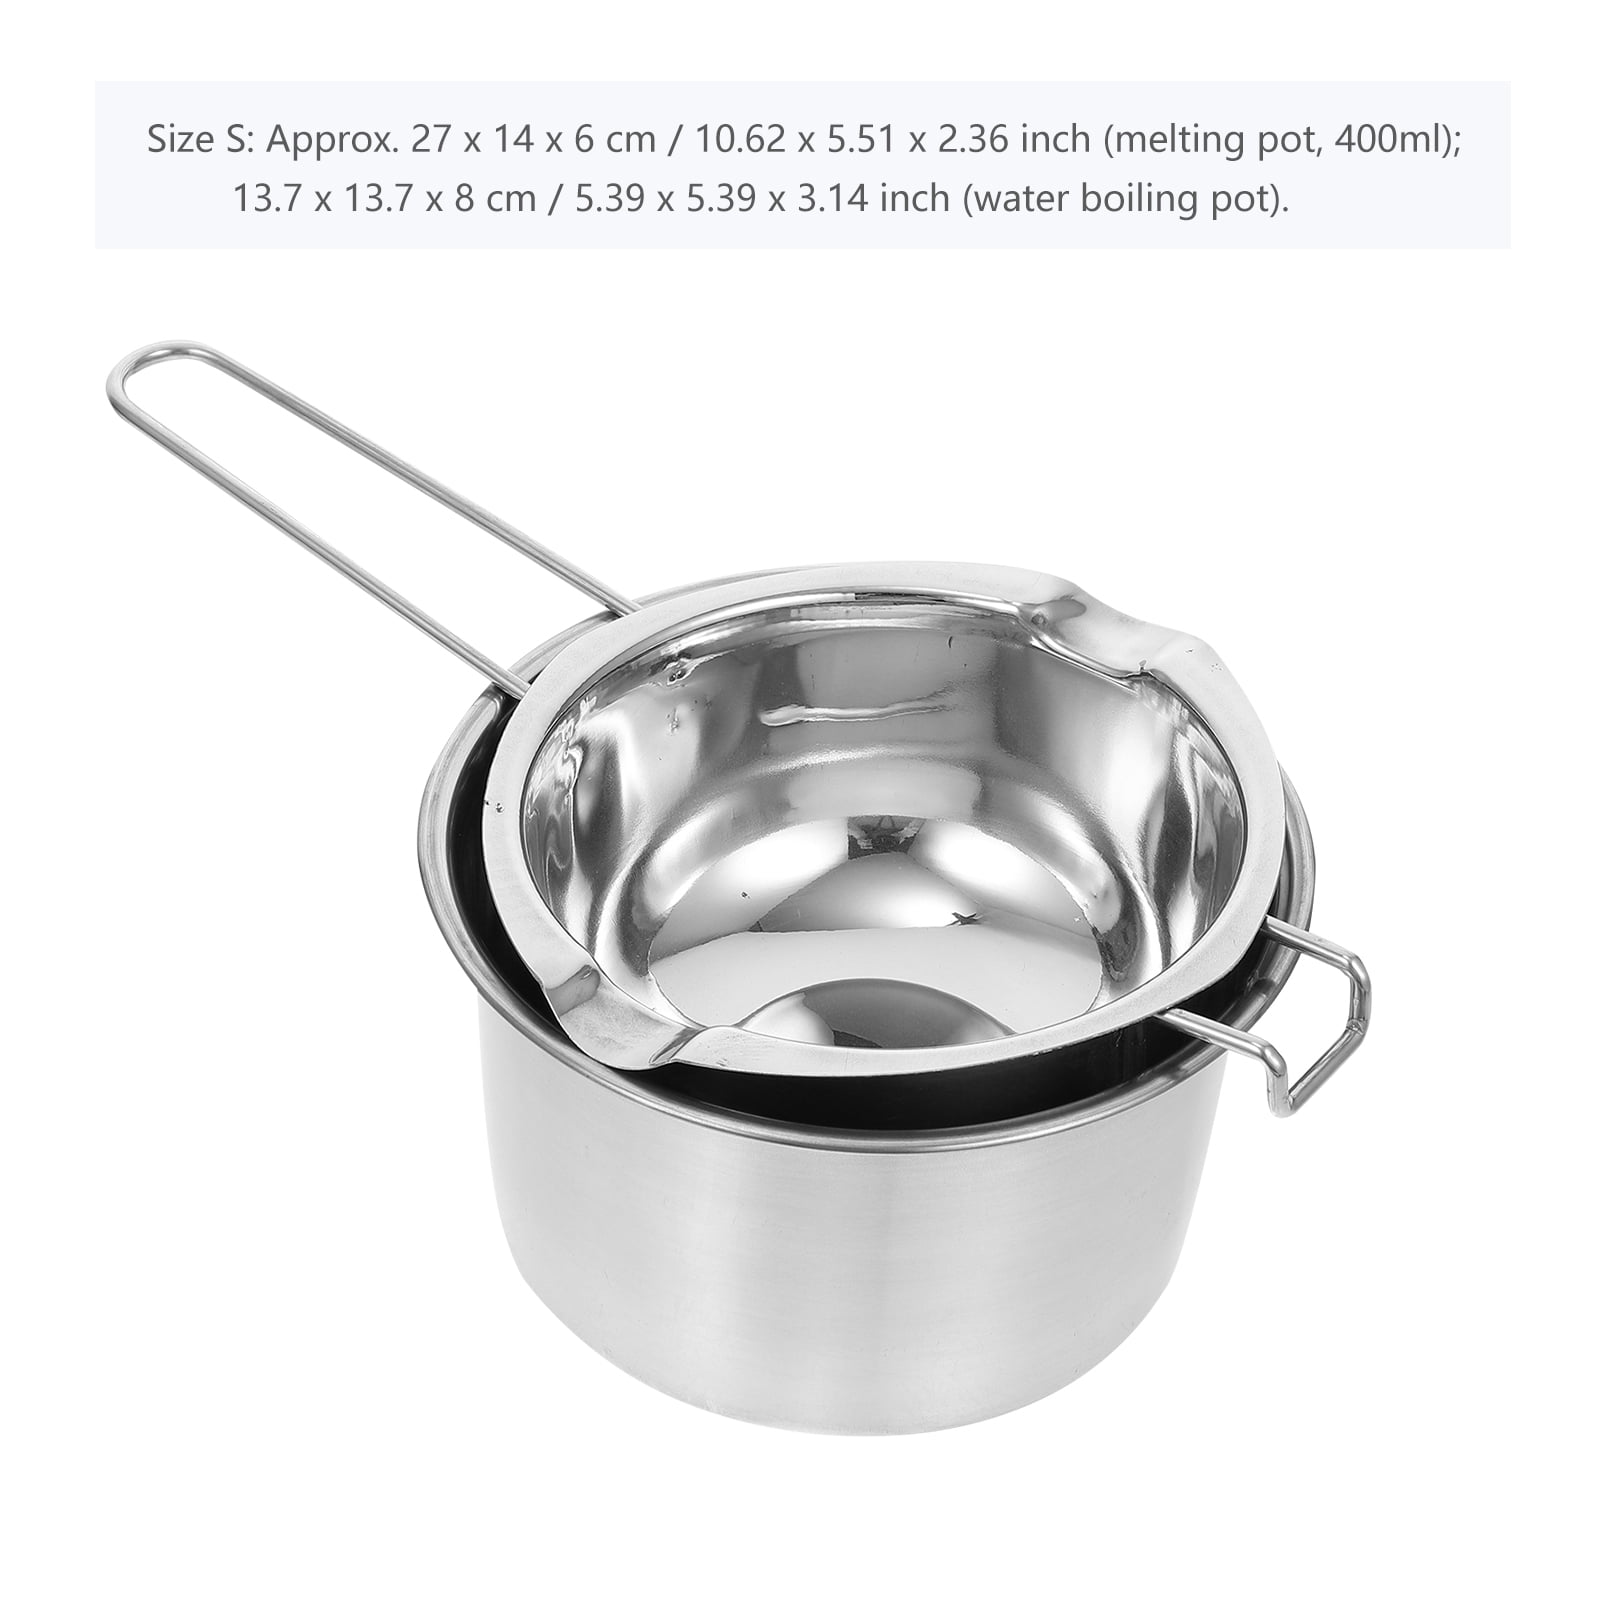 2x Stainless Steel Wax Melting Pot Double Boiler for DIY Candle Soap Making